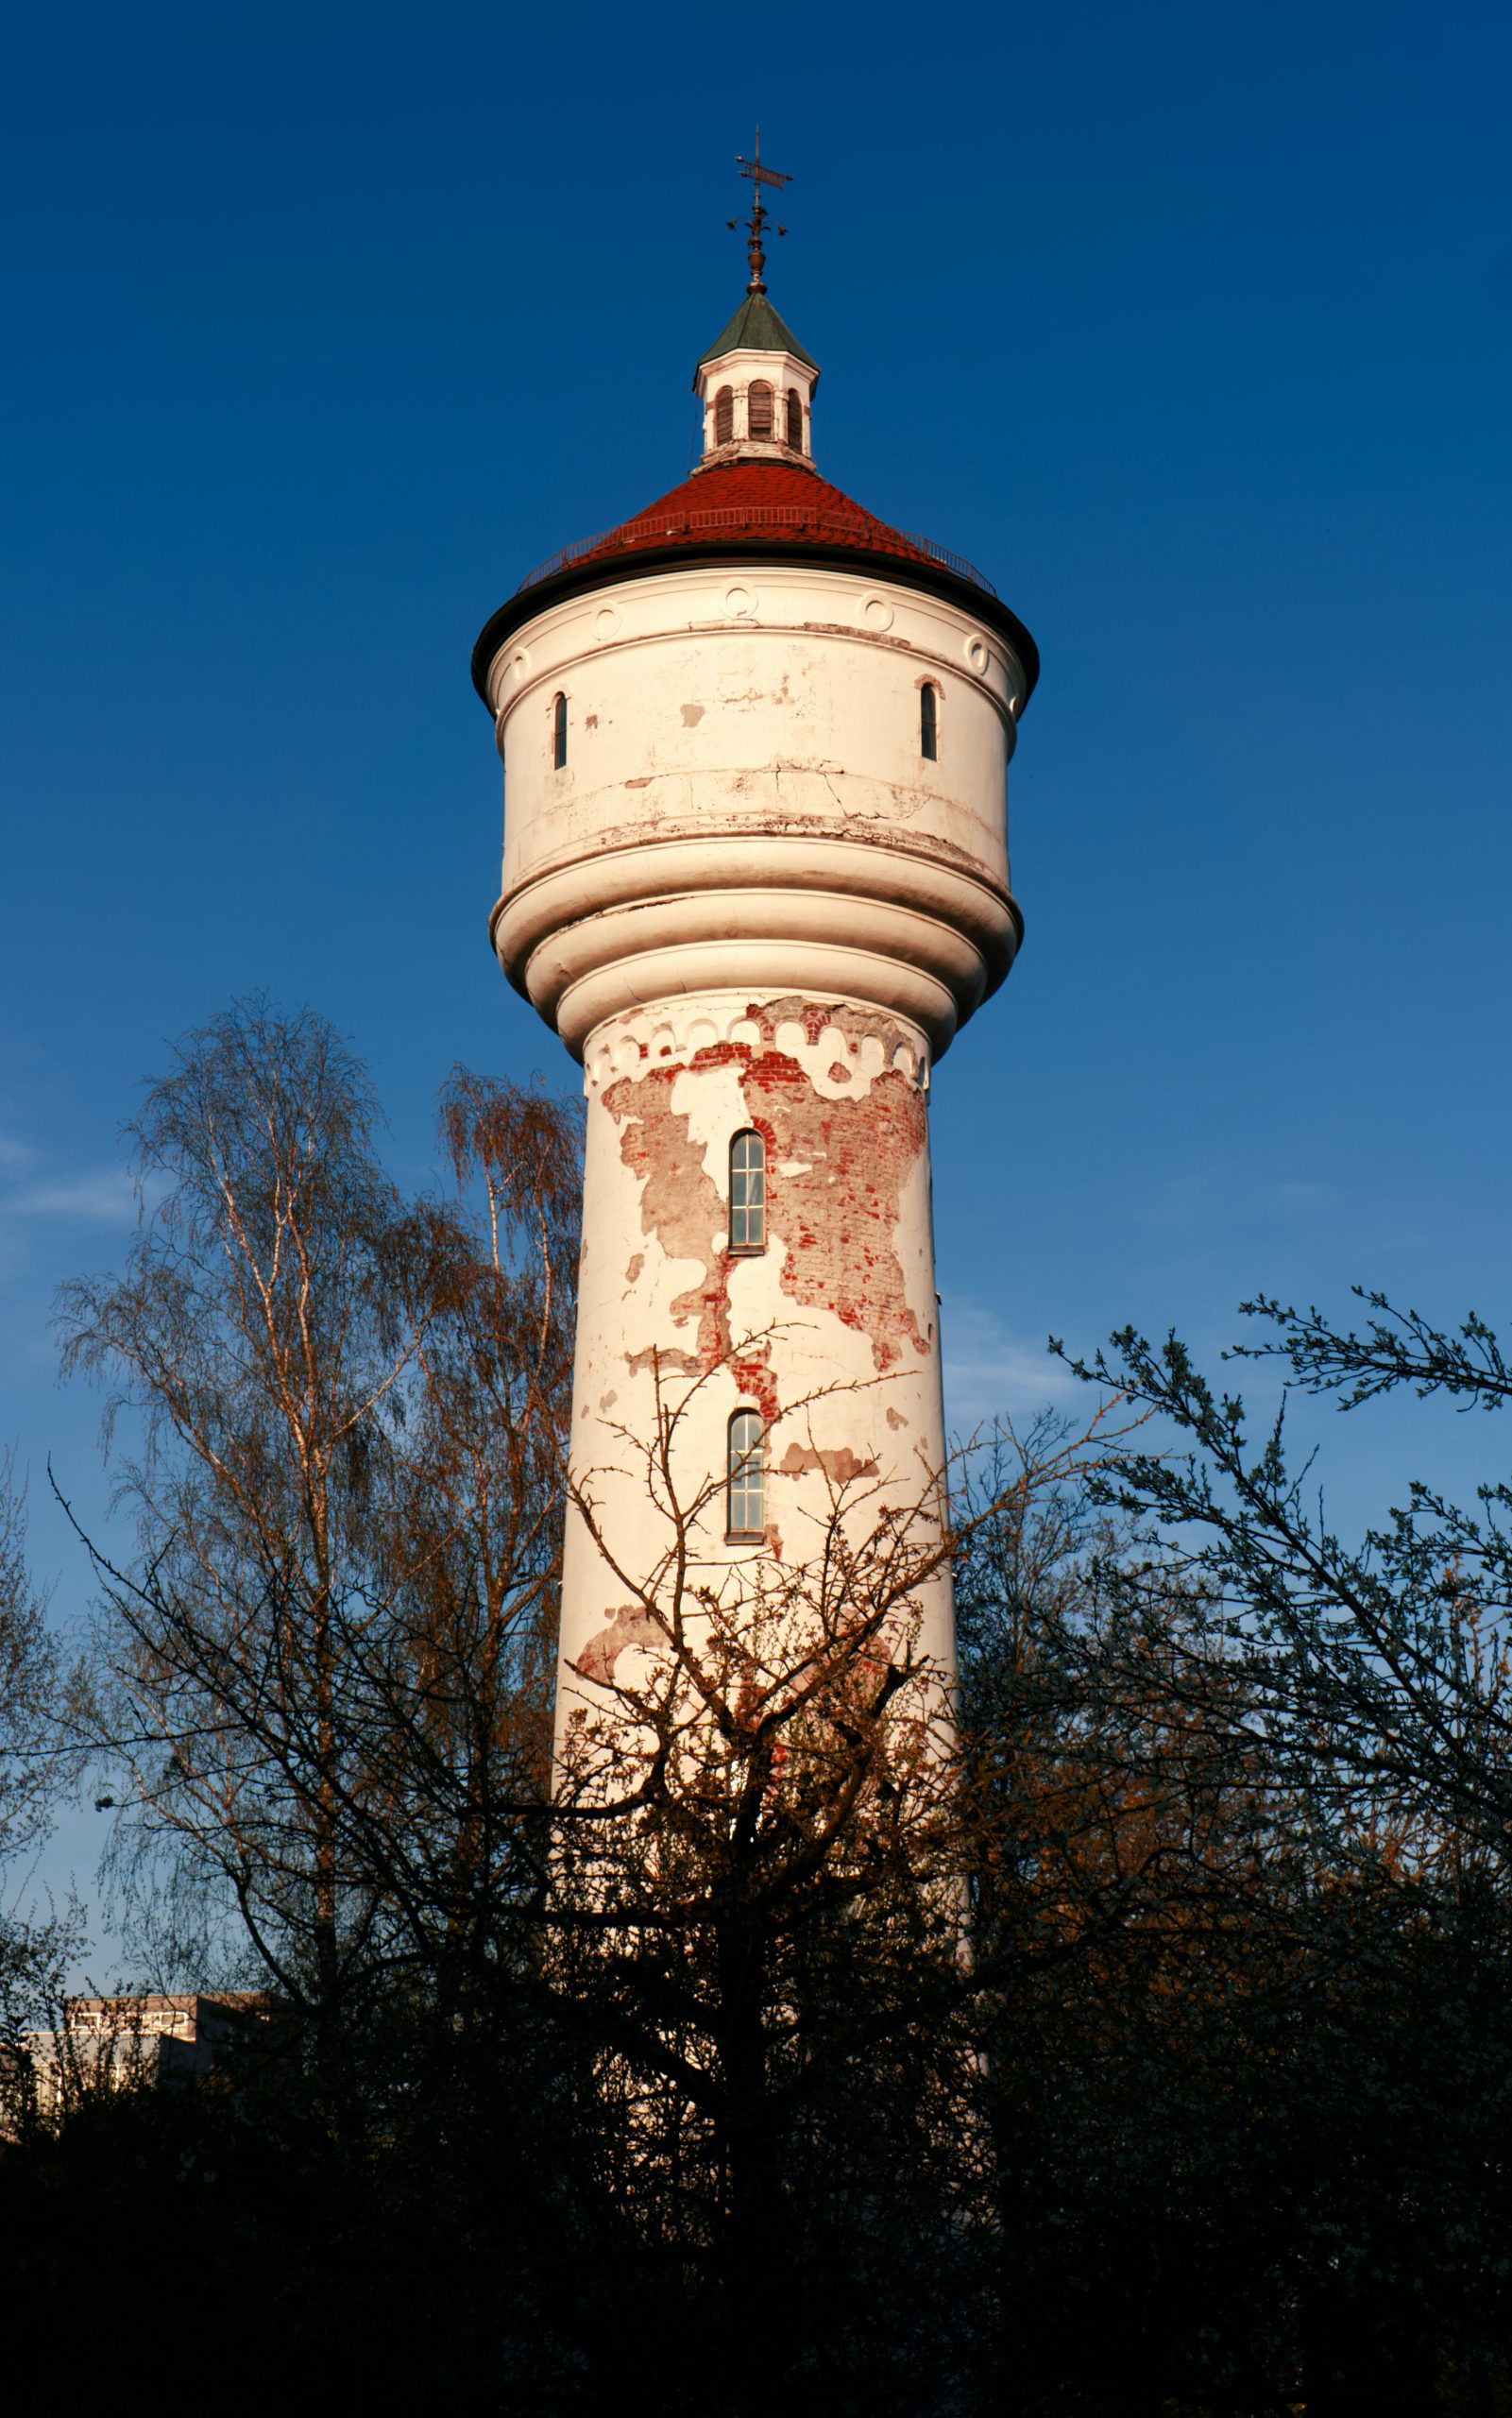 White tower with red coned roof against a blue sky with bushy trees in the foreground.